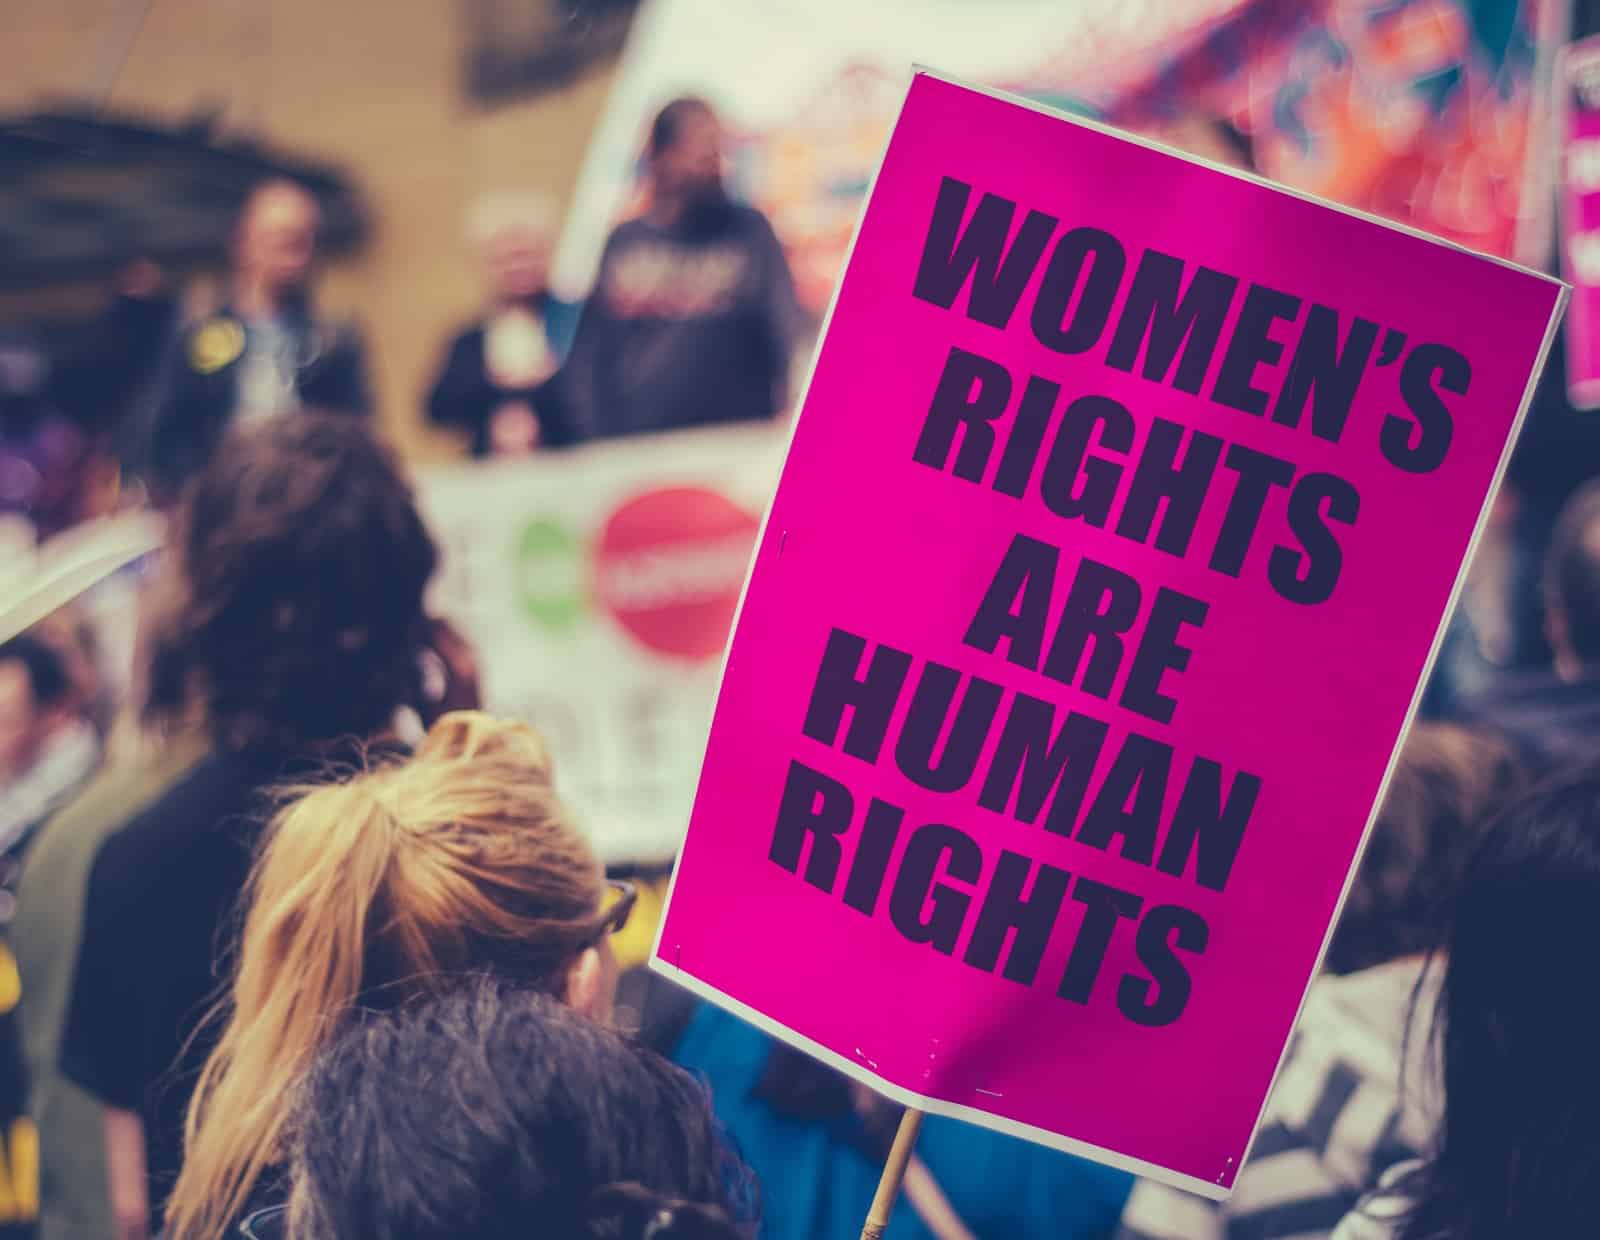 Image Credit: Shutterstock / Mr Doomits <p><span>The largest single-day protest in U.S. history was organized via social media, advocating for women’s rights, immigration reform, healthcare reform, and more, impacting public policies and election outcomes.</span></p>